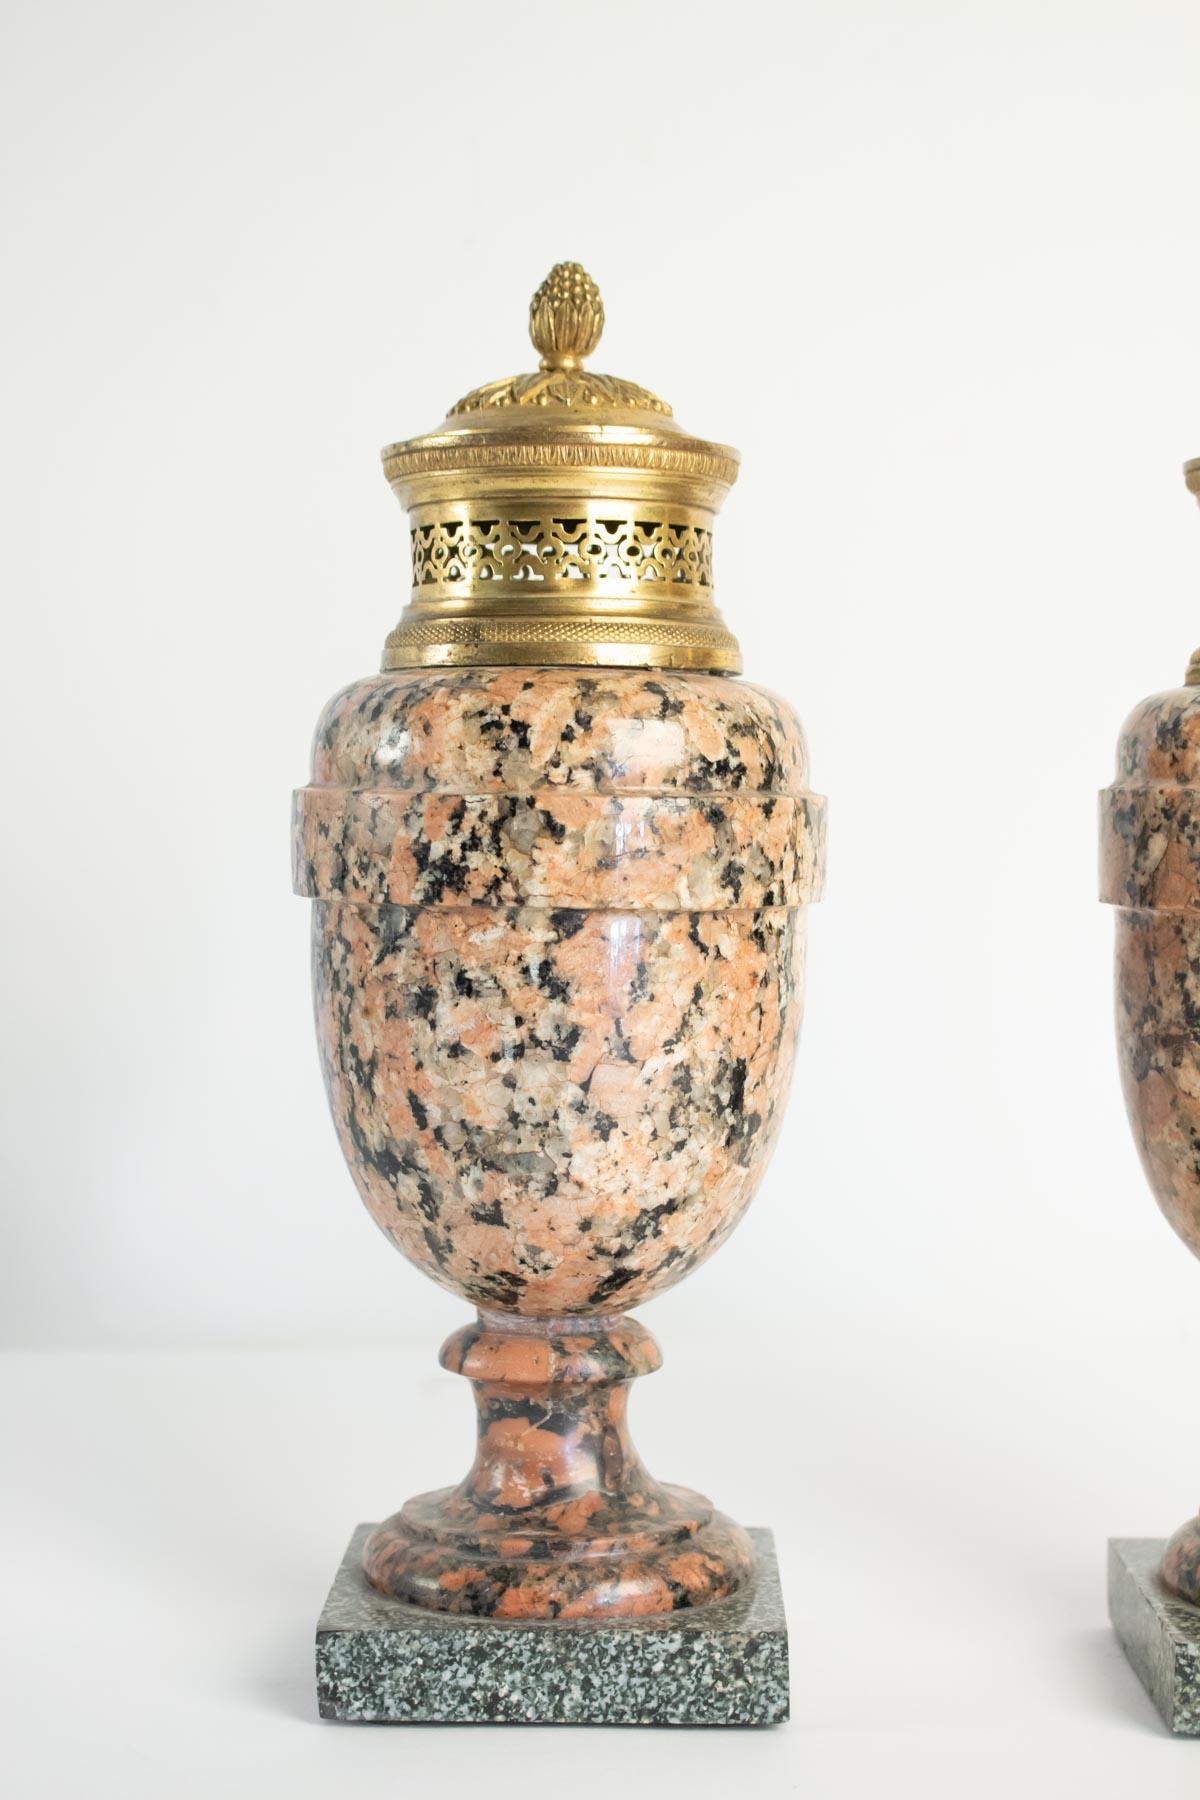 French Pair of Period Louis XVI Rose Granite Urns with Gold Gilt Bronze, 18th Century